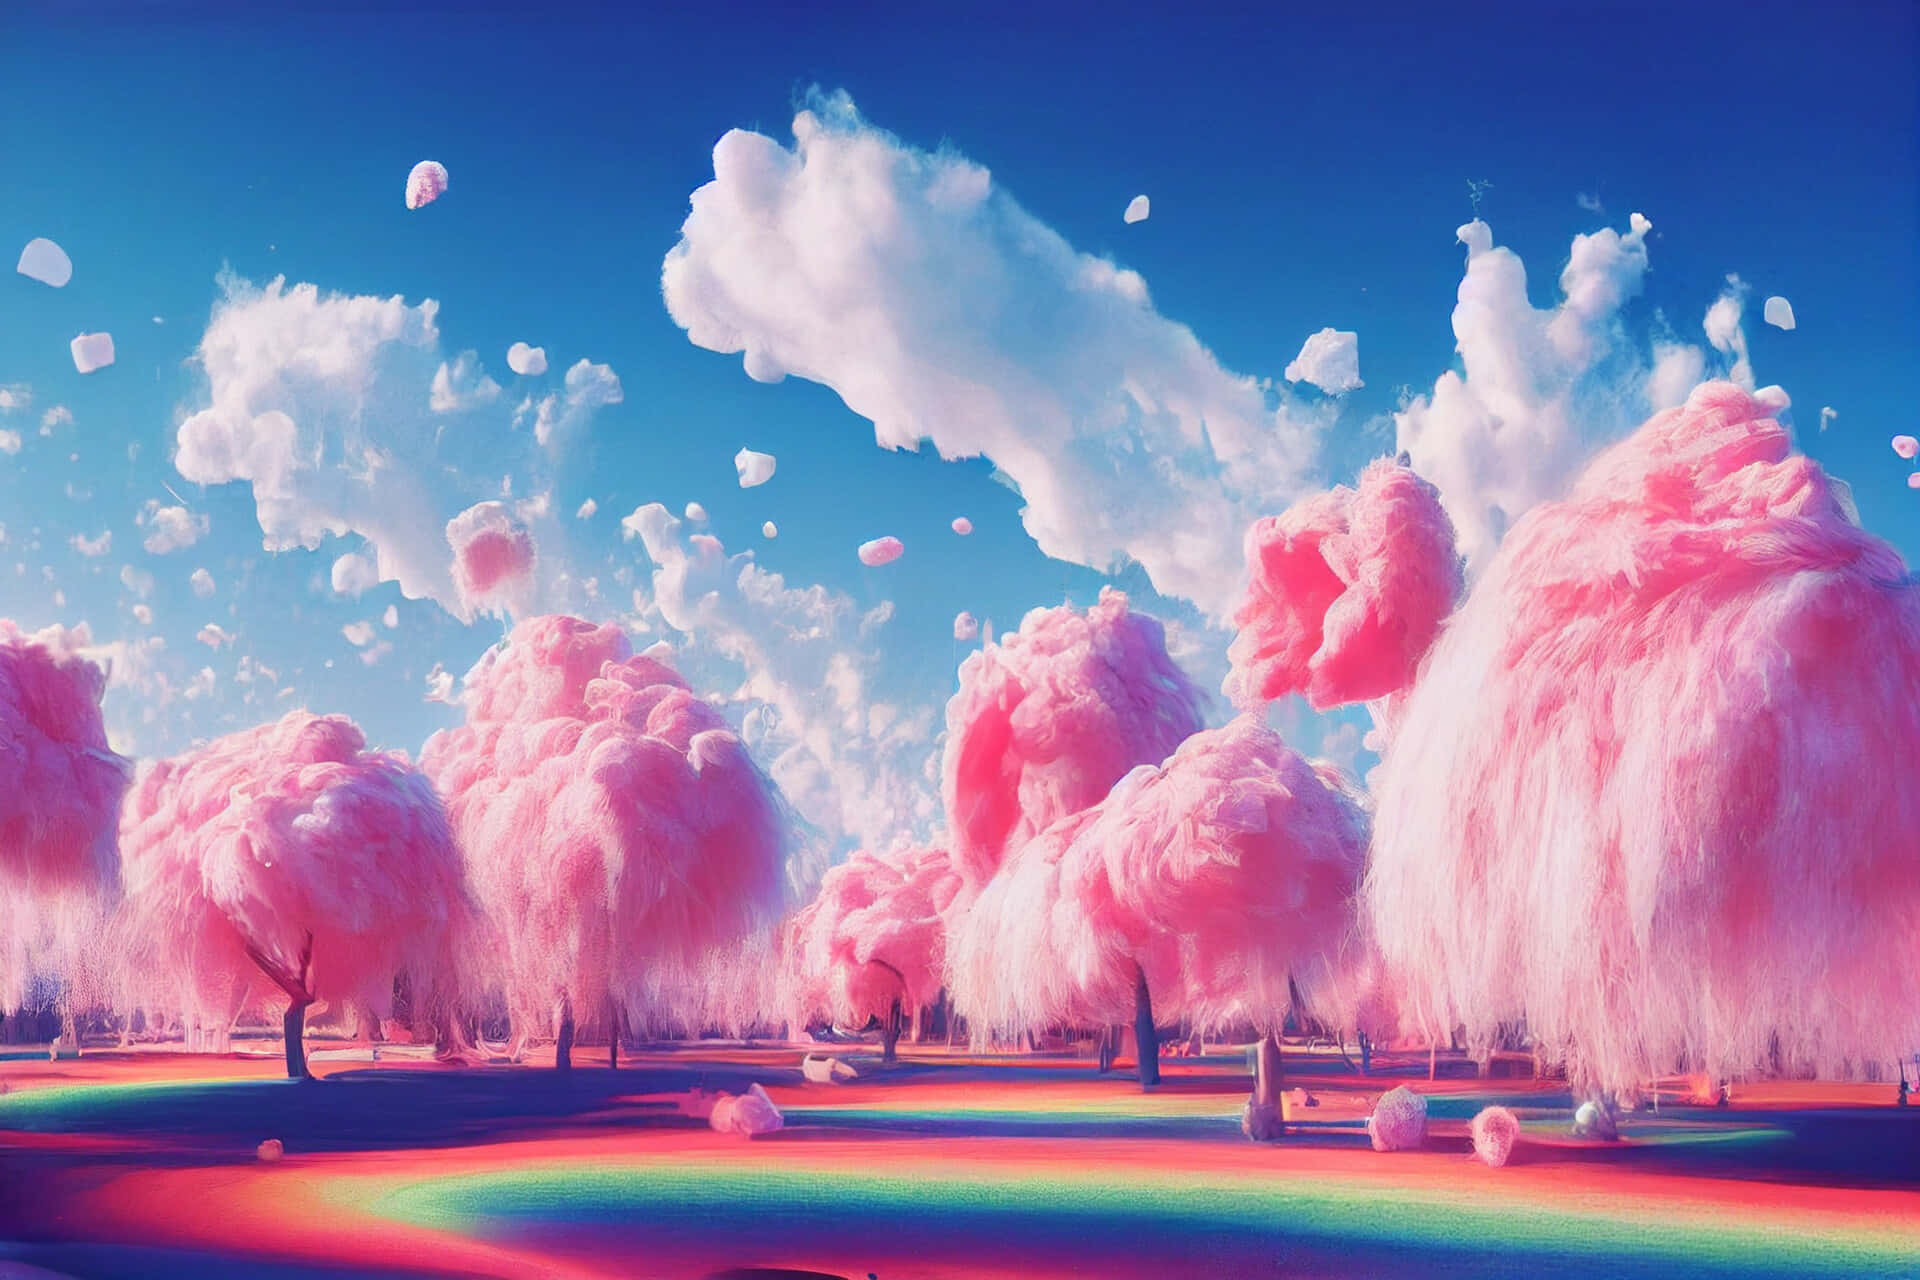 Trippy Aesthetic Clouds On Rainbow Ground Wallpaper